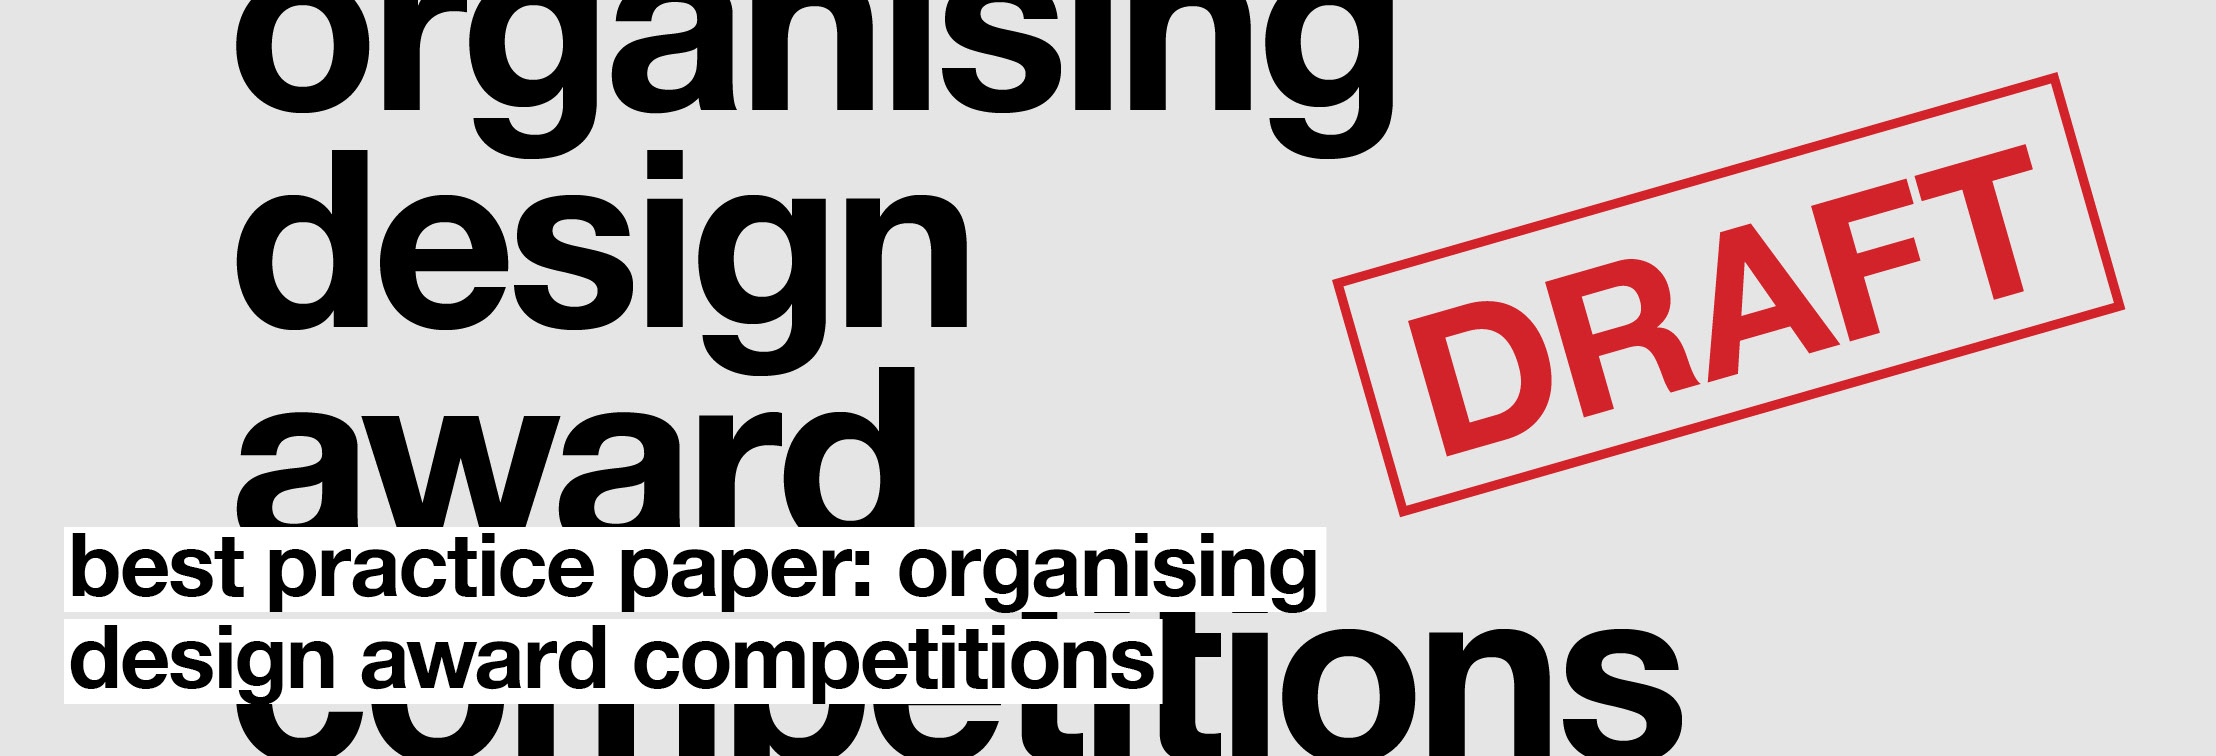 Organising Design Award Competitions